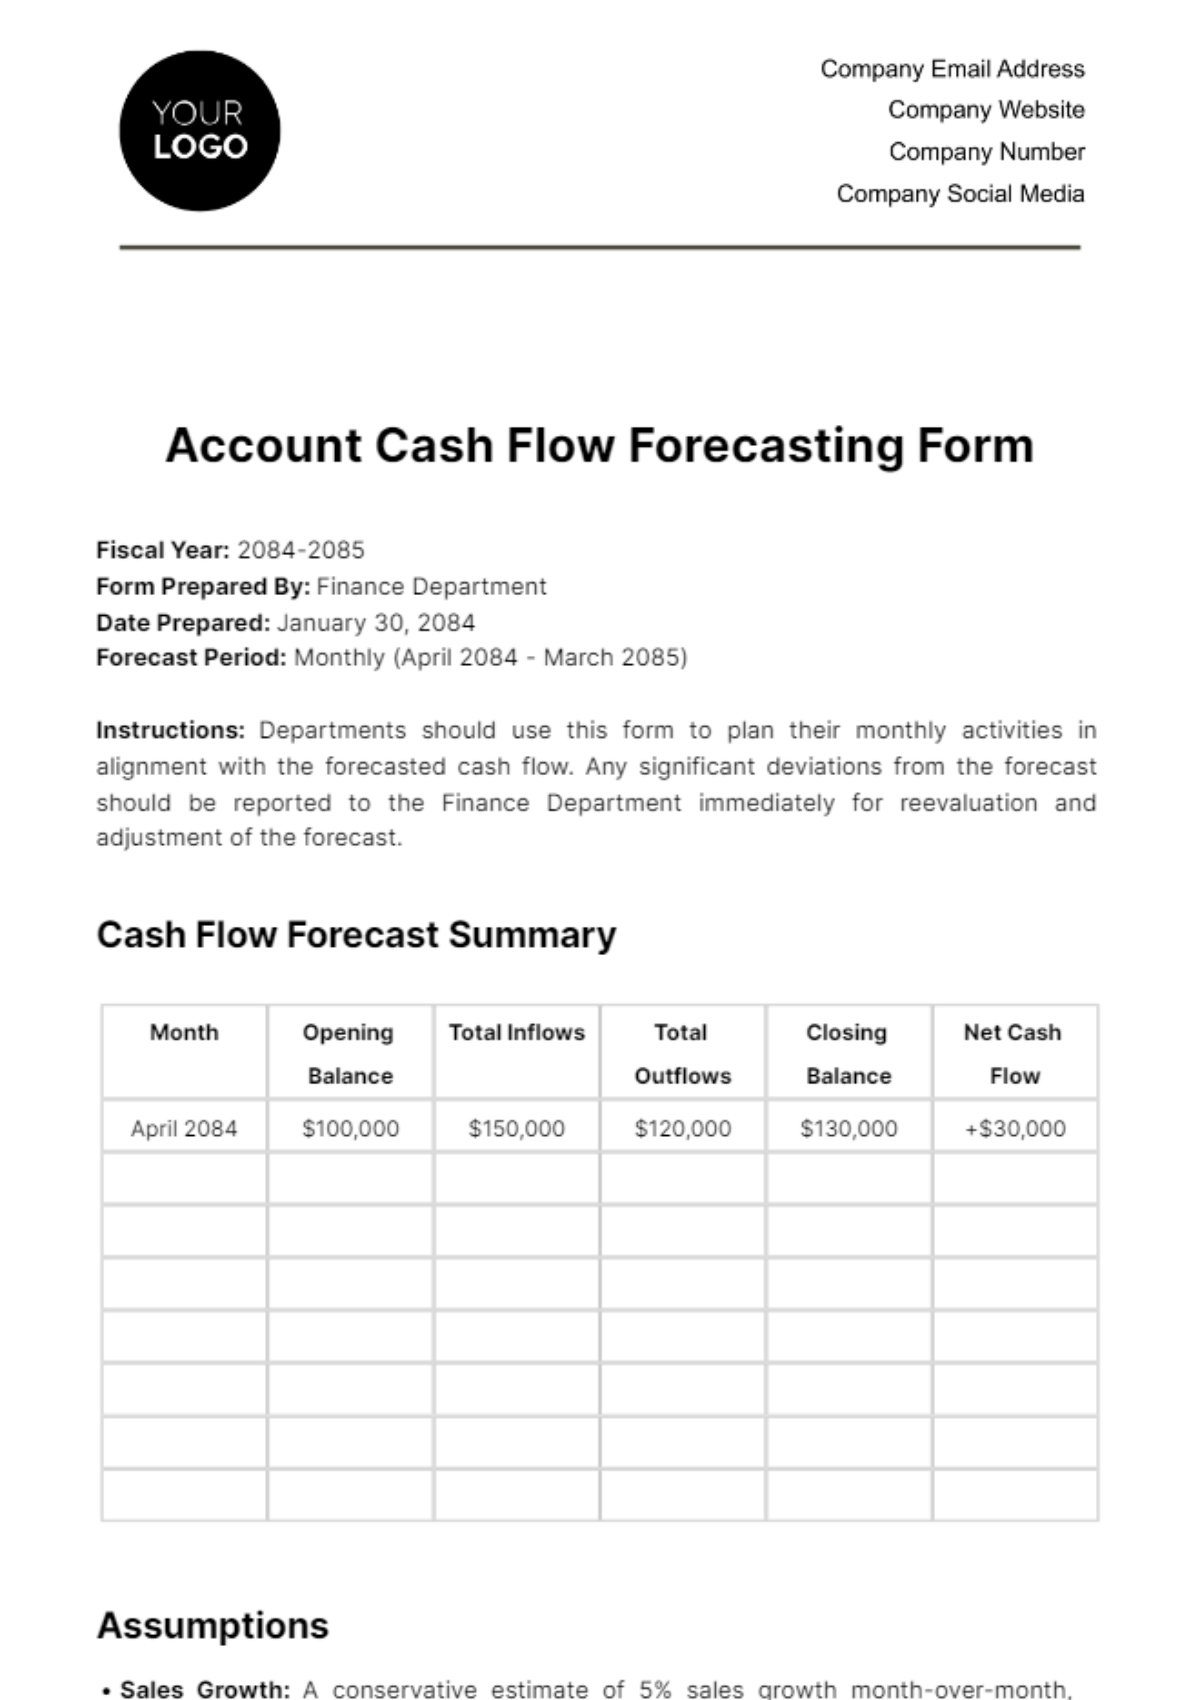 Account Cash Flow Forecasting Form Template